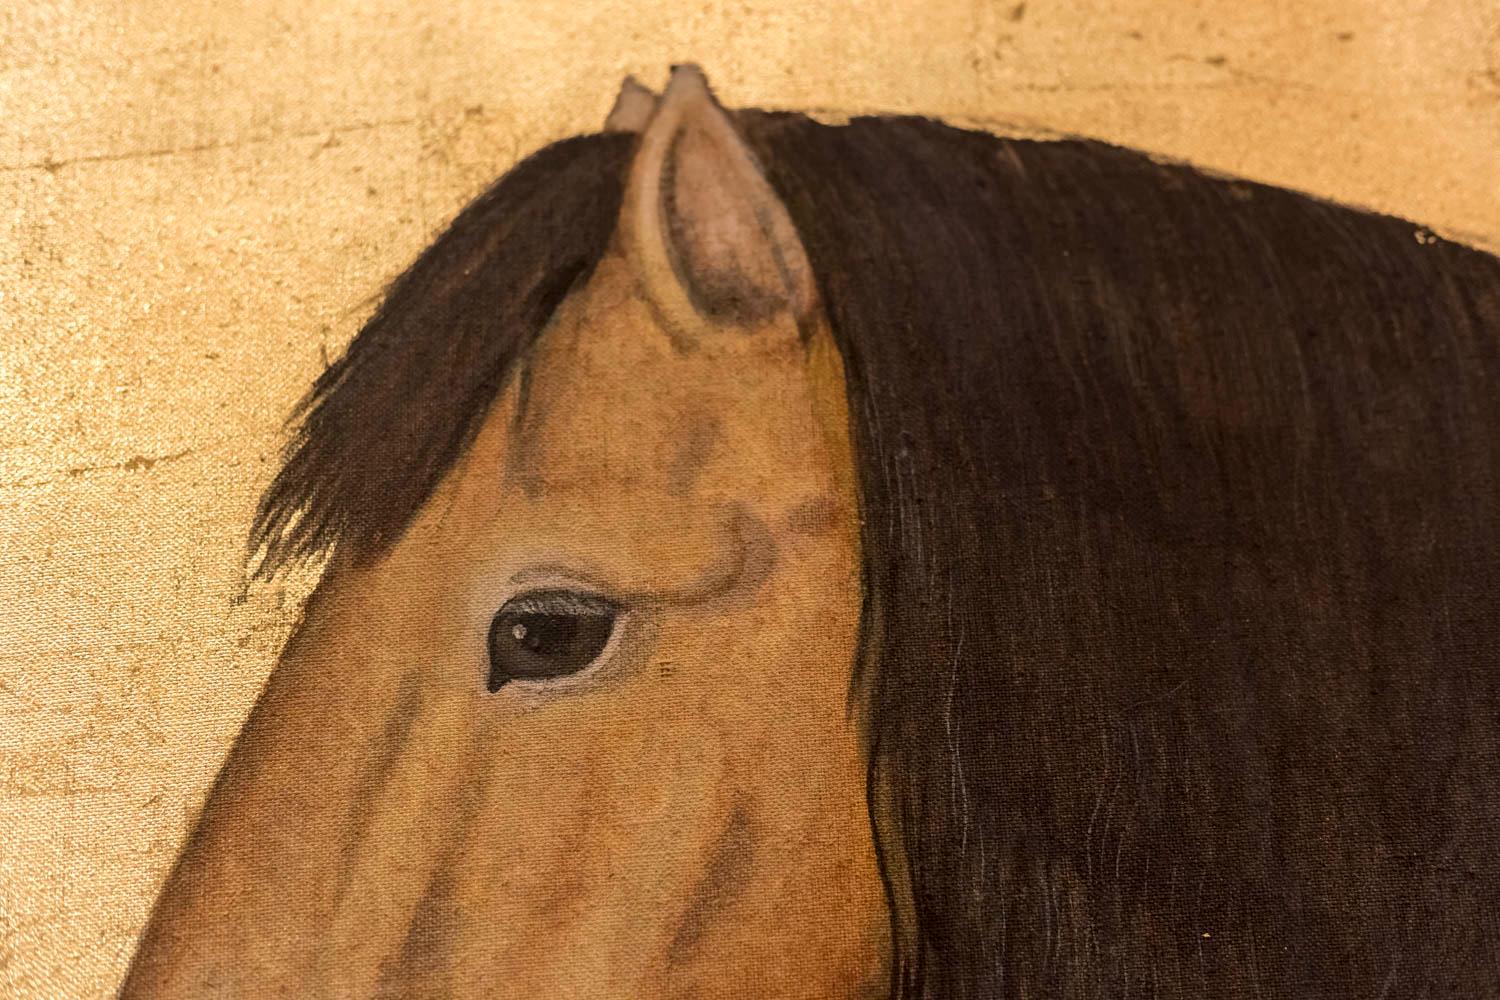 Painted canvas figuring a horse with a brown bai coat, detached from the gilt background represented in profile. The ending of its legs, its mane, tale and eyes are black. 

Linen raw canvas hand painted with natural pigments and background gilt